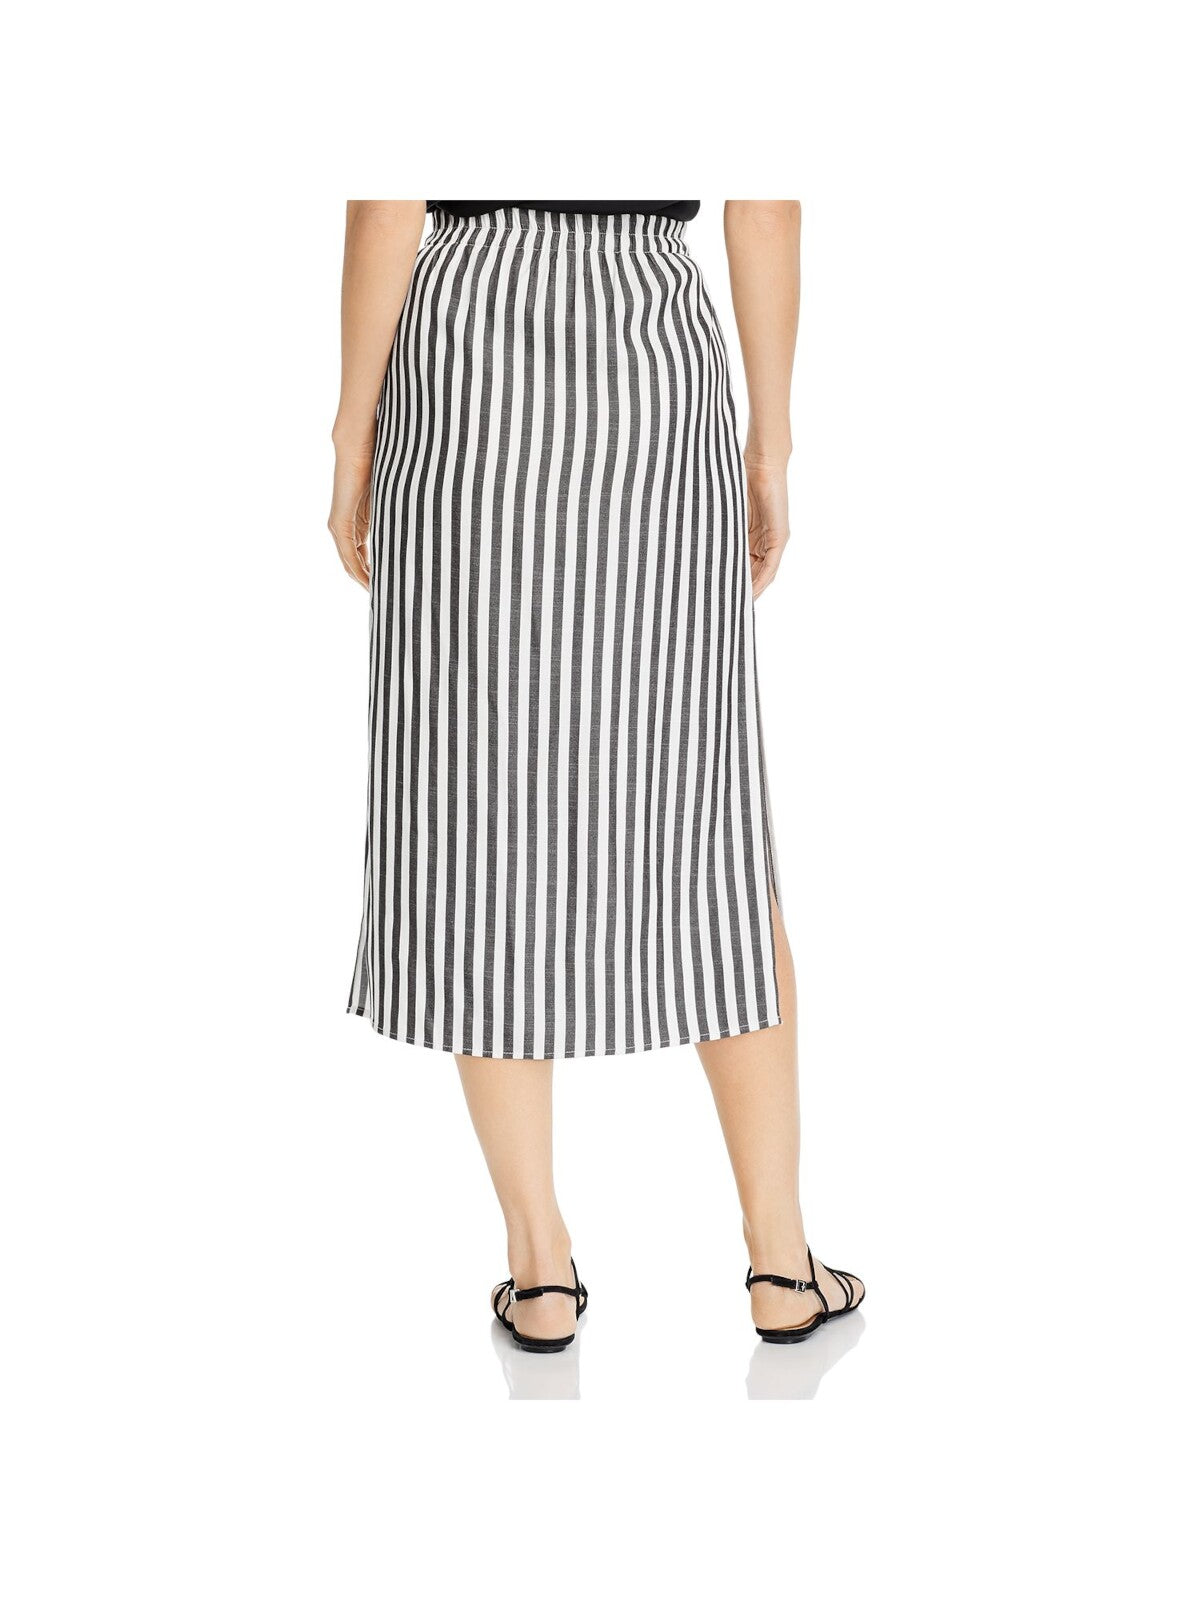 CUPCAKES AND CASHMERE Womens Stretch Pocketed Button-down Midi Skirt